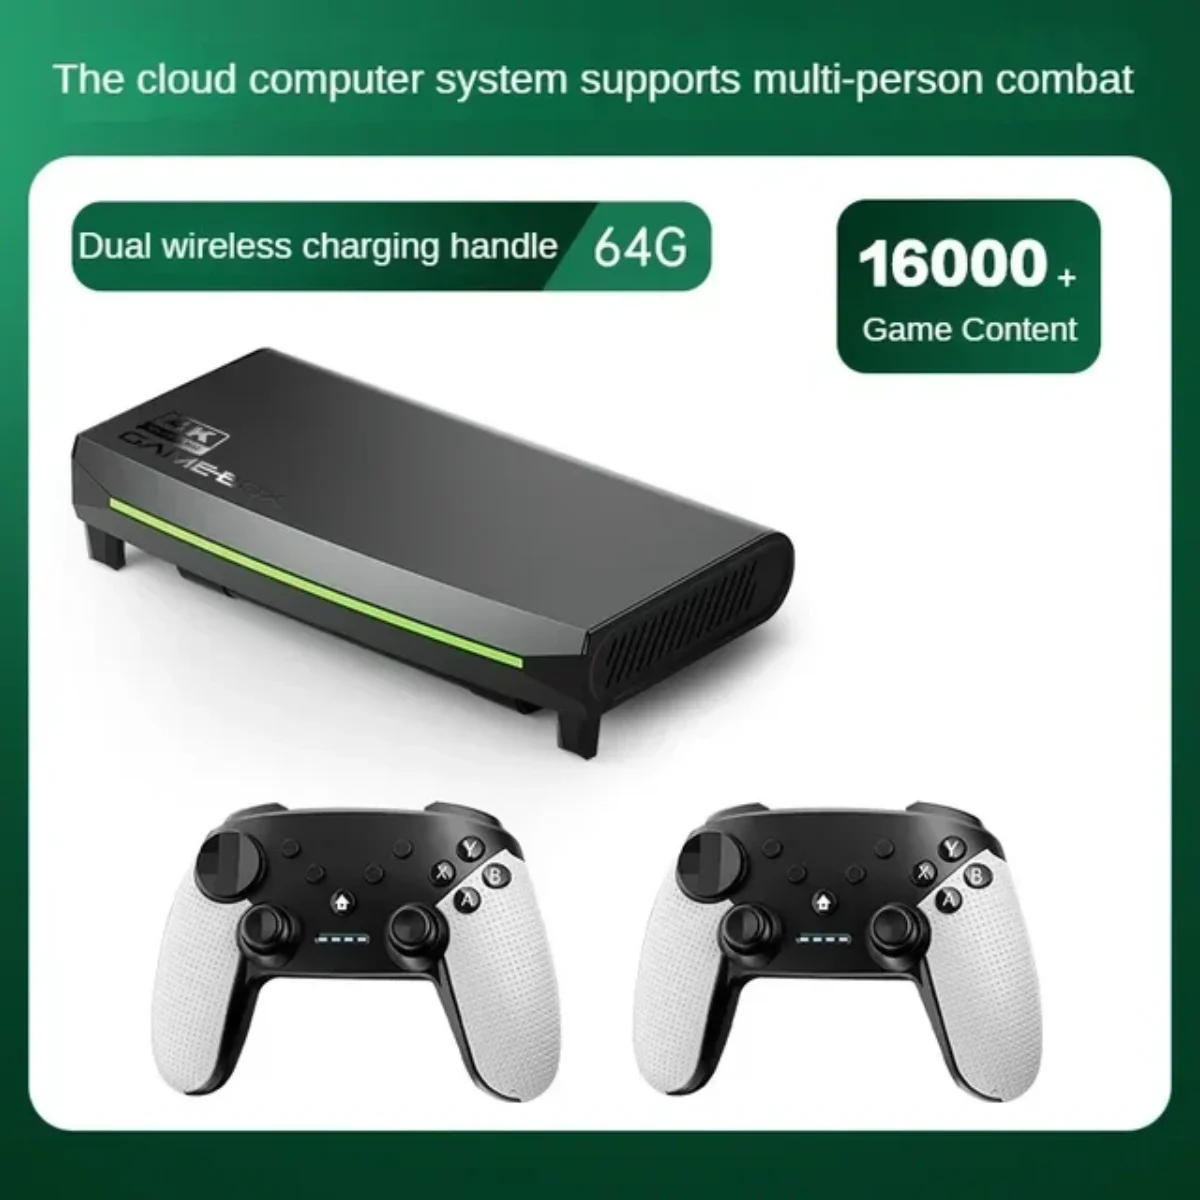 GAMEBOX H6 Console S905X3 Game Box Ultra HD 4K Portable with Built-in Games  Wireless Controllers